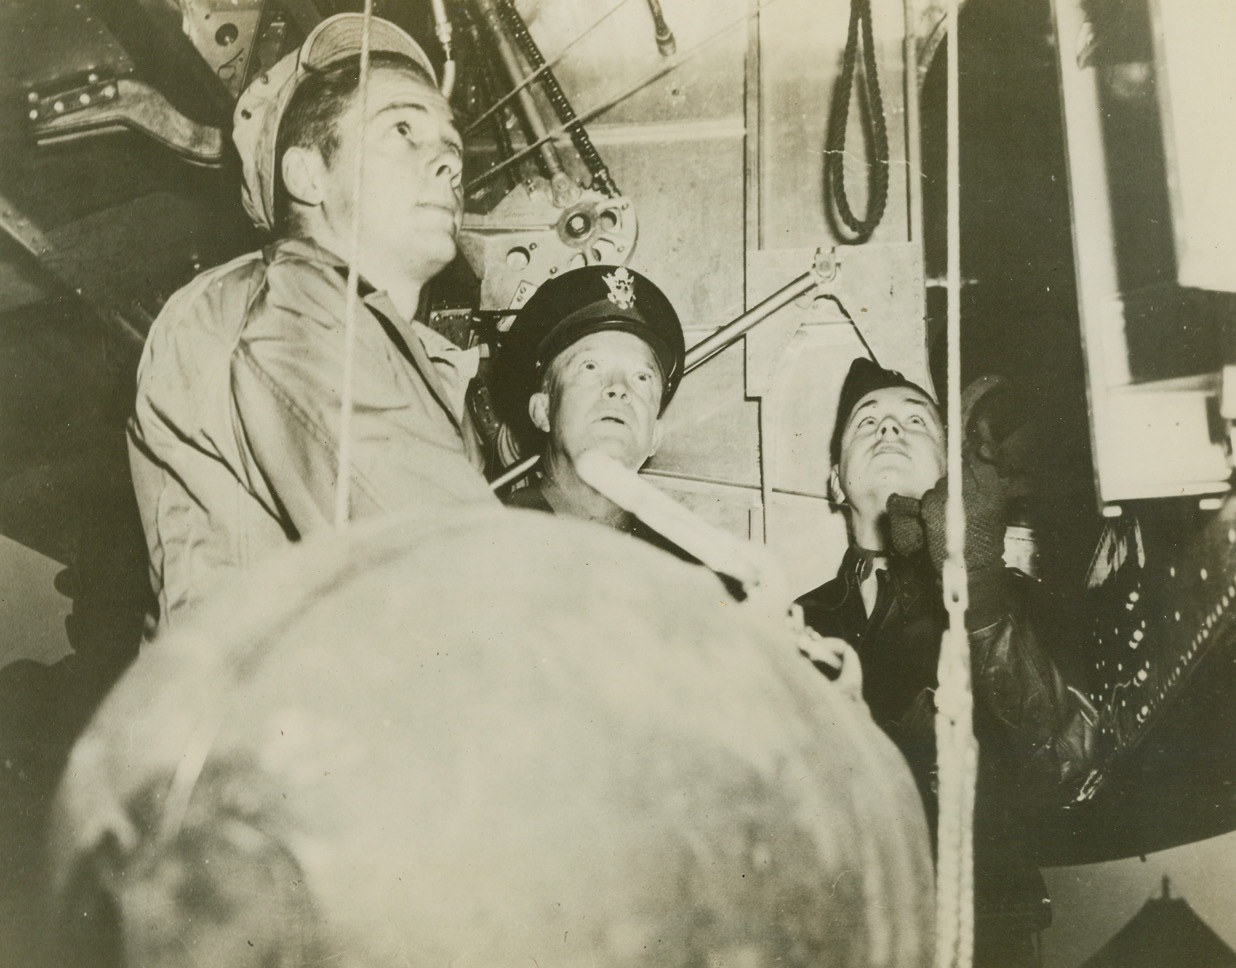 IKE WATCHES “EGG” LOADING,  4/24/1944. ENGLAND – Gen. Dwight D. Eisenhower, Chief of Allied Forces in the European theater, (center), watches a heavy bomb being hoisted into the bomb bay of a B-26 Marauder, during a recent visit to a American base “somewhere in England.” (The men with the General are not identified.)Credit: U.S.A.A.F photo from Acme;